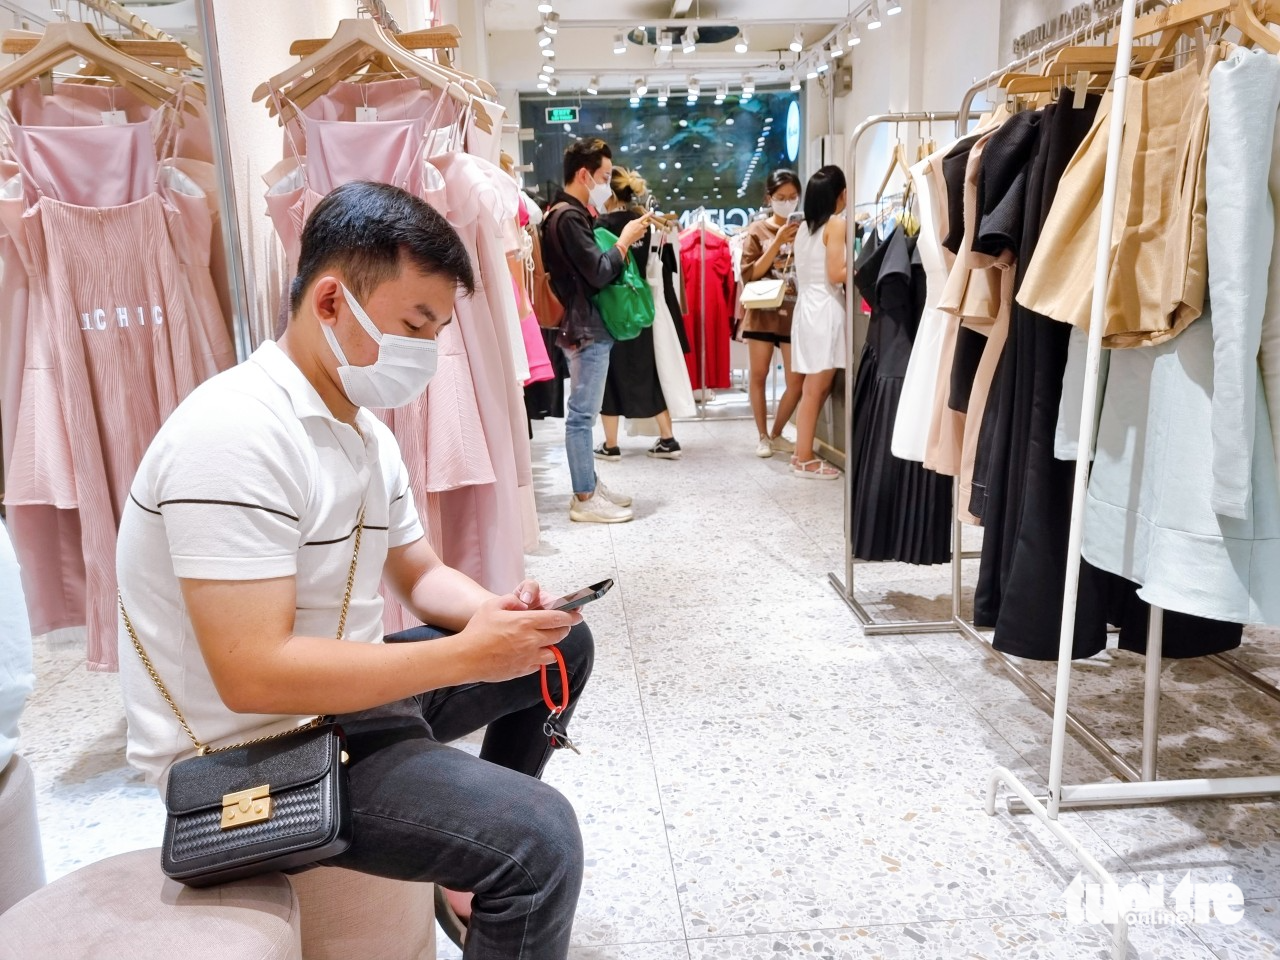 A man waits for his girlfriend during a clothes shopping on Nguyen Trai Street in District 1, Ho Chi Minh City, January 2023. Photo: Nhat Xuan / Tuoi Tre